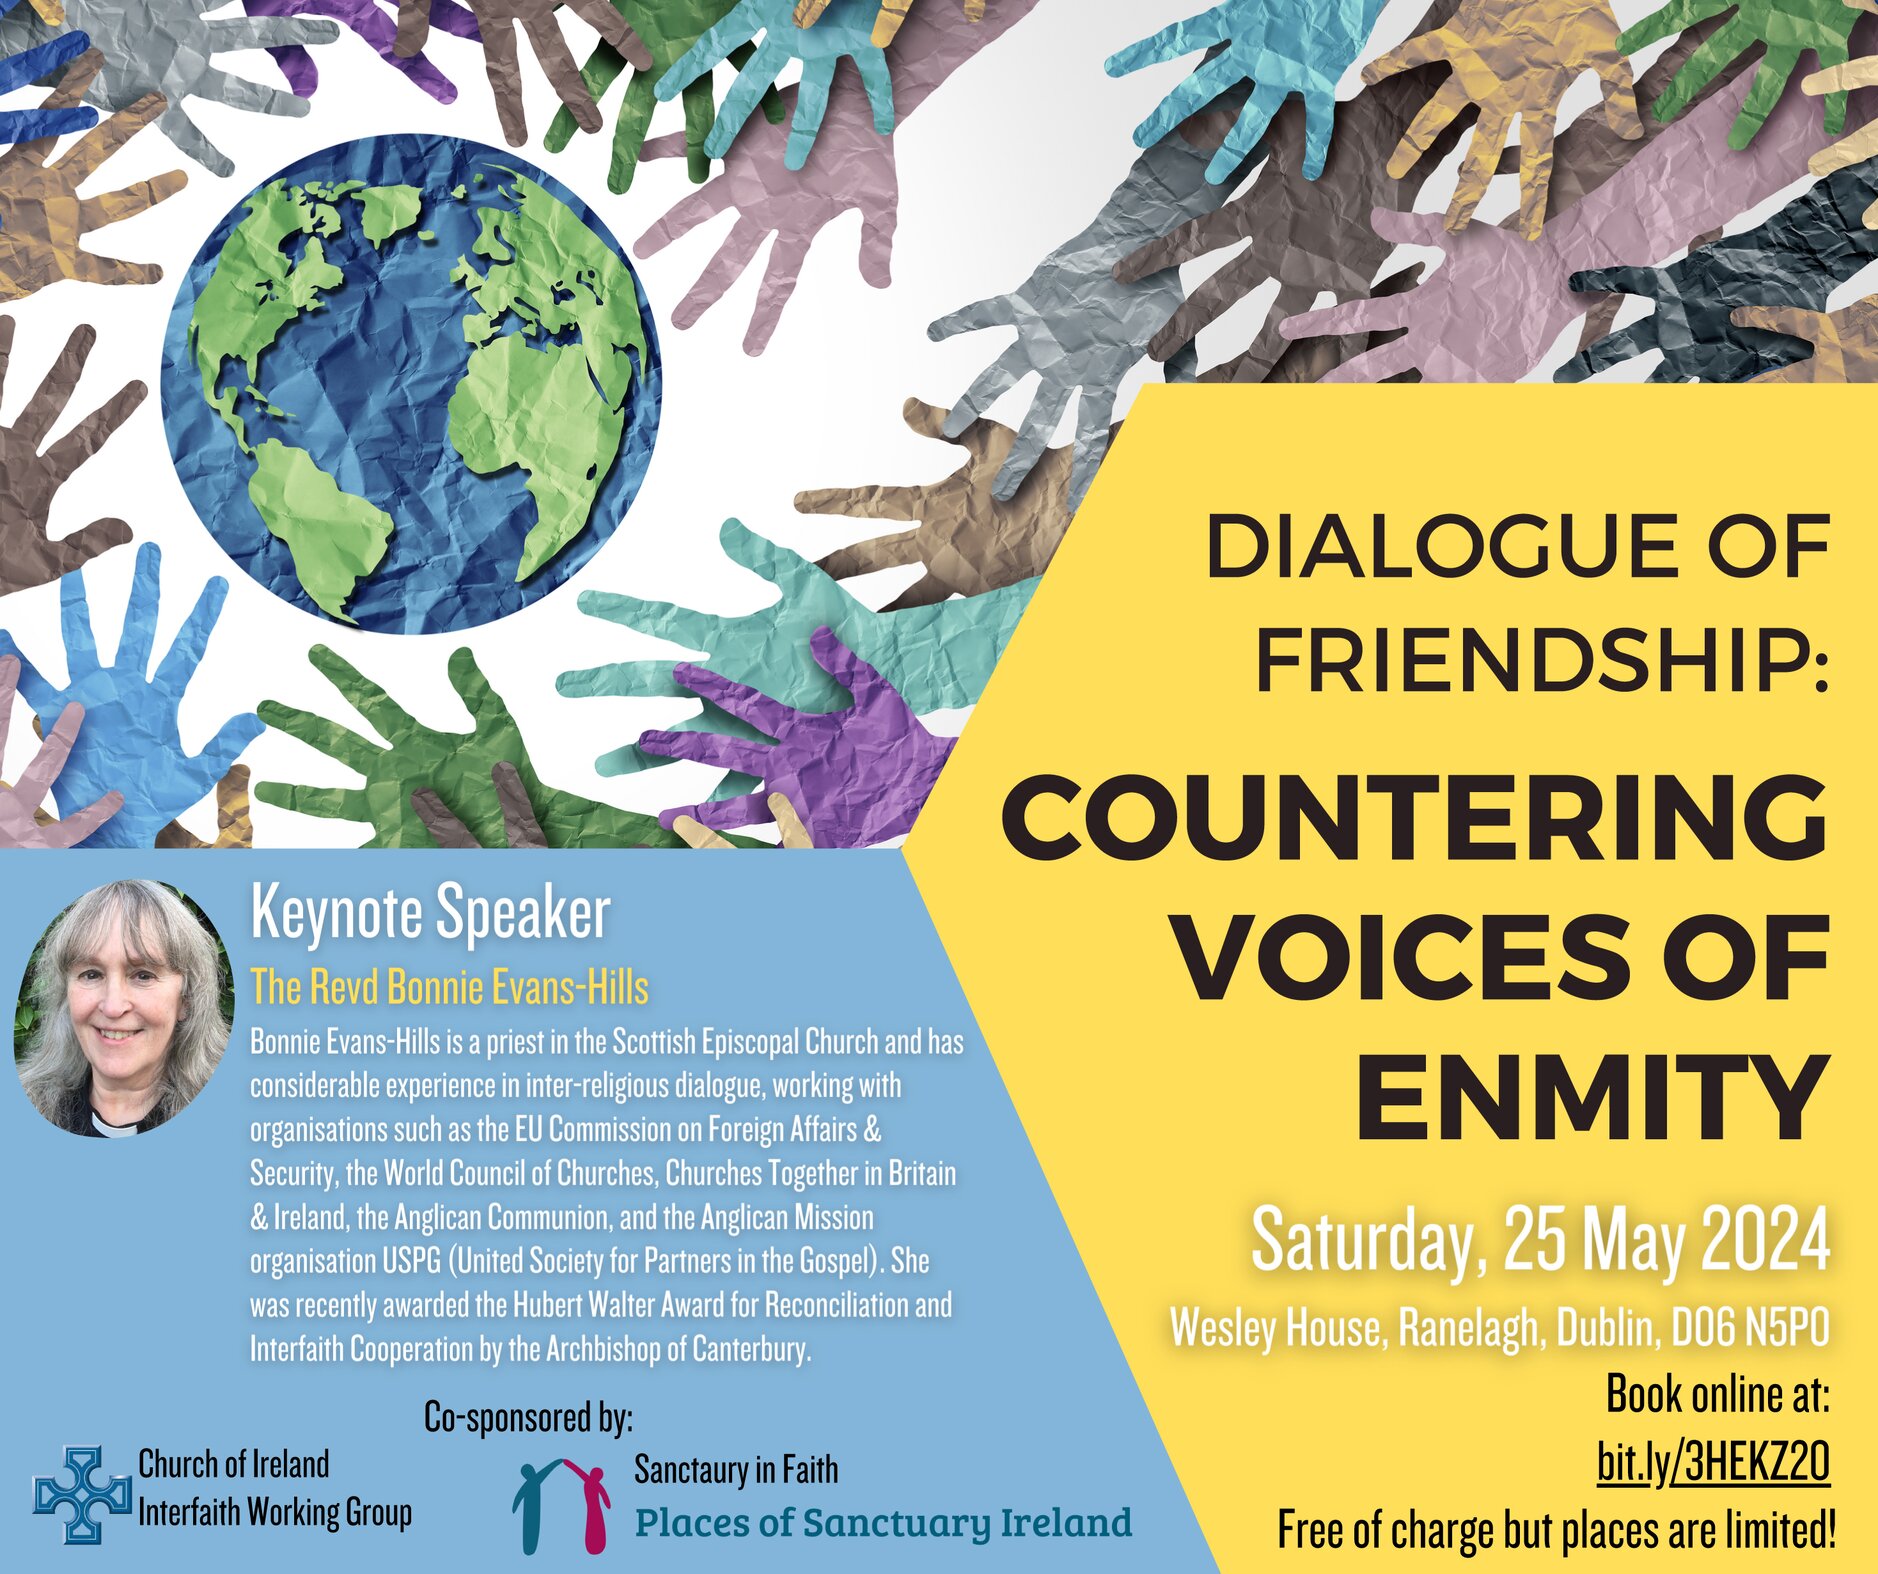 Dialogue of Friendship: Countering Voices of Enmity - Saturday, 25th May 2024, at Wesley House, Dublin